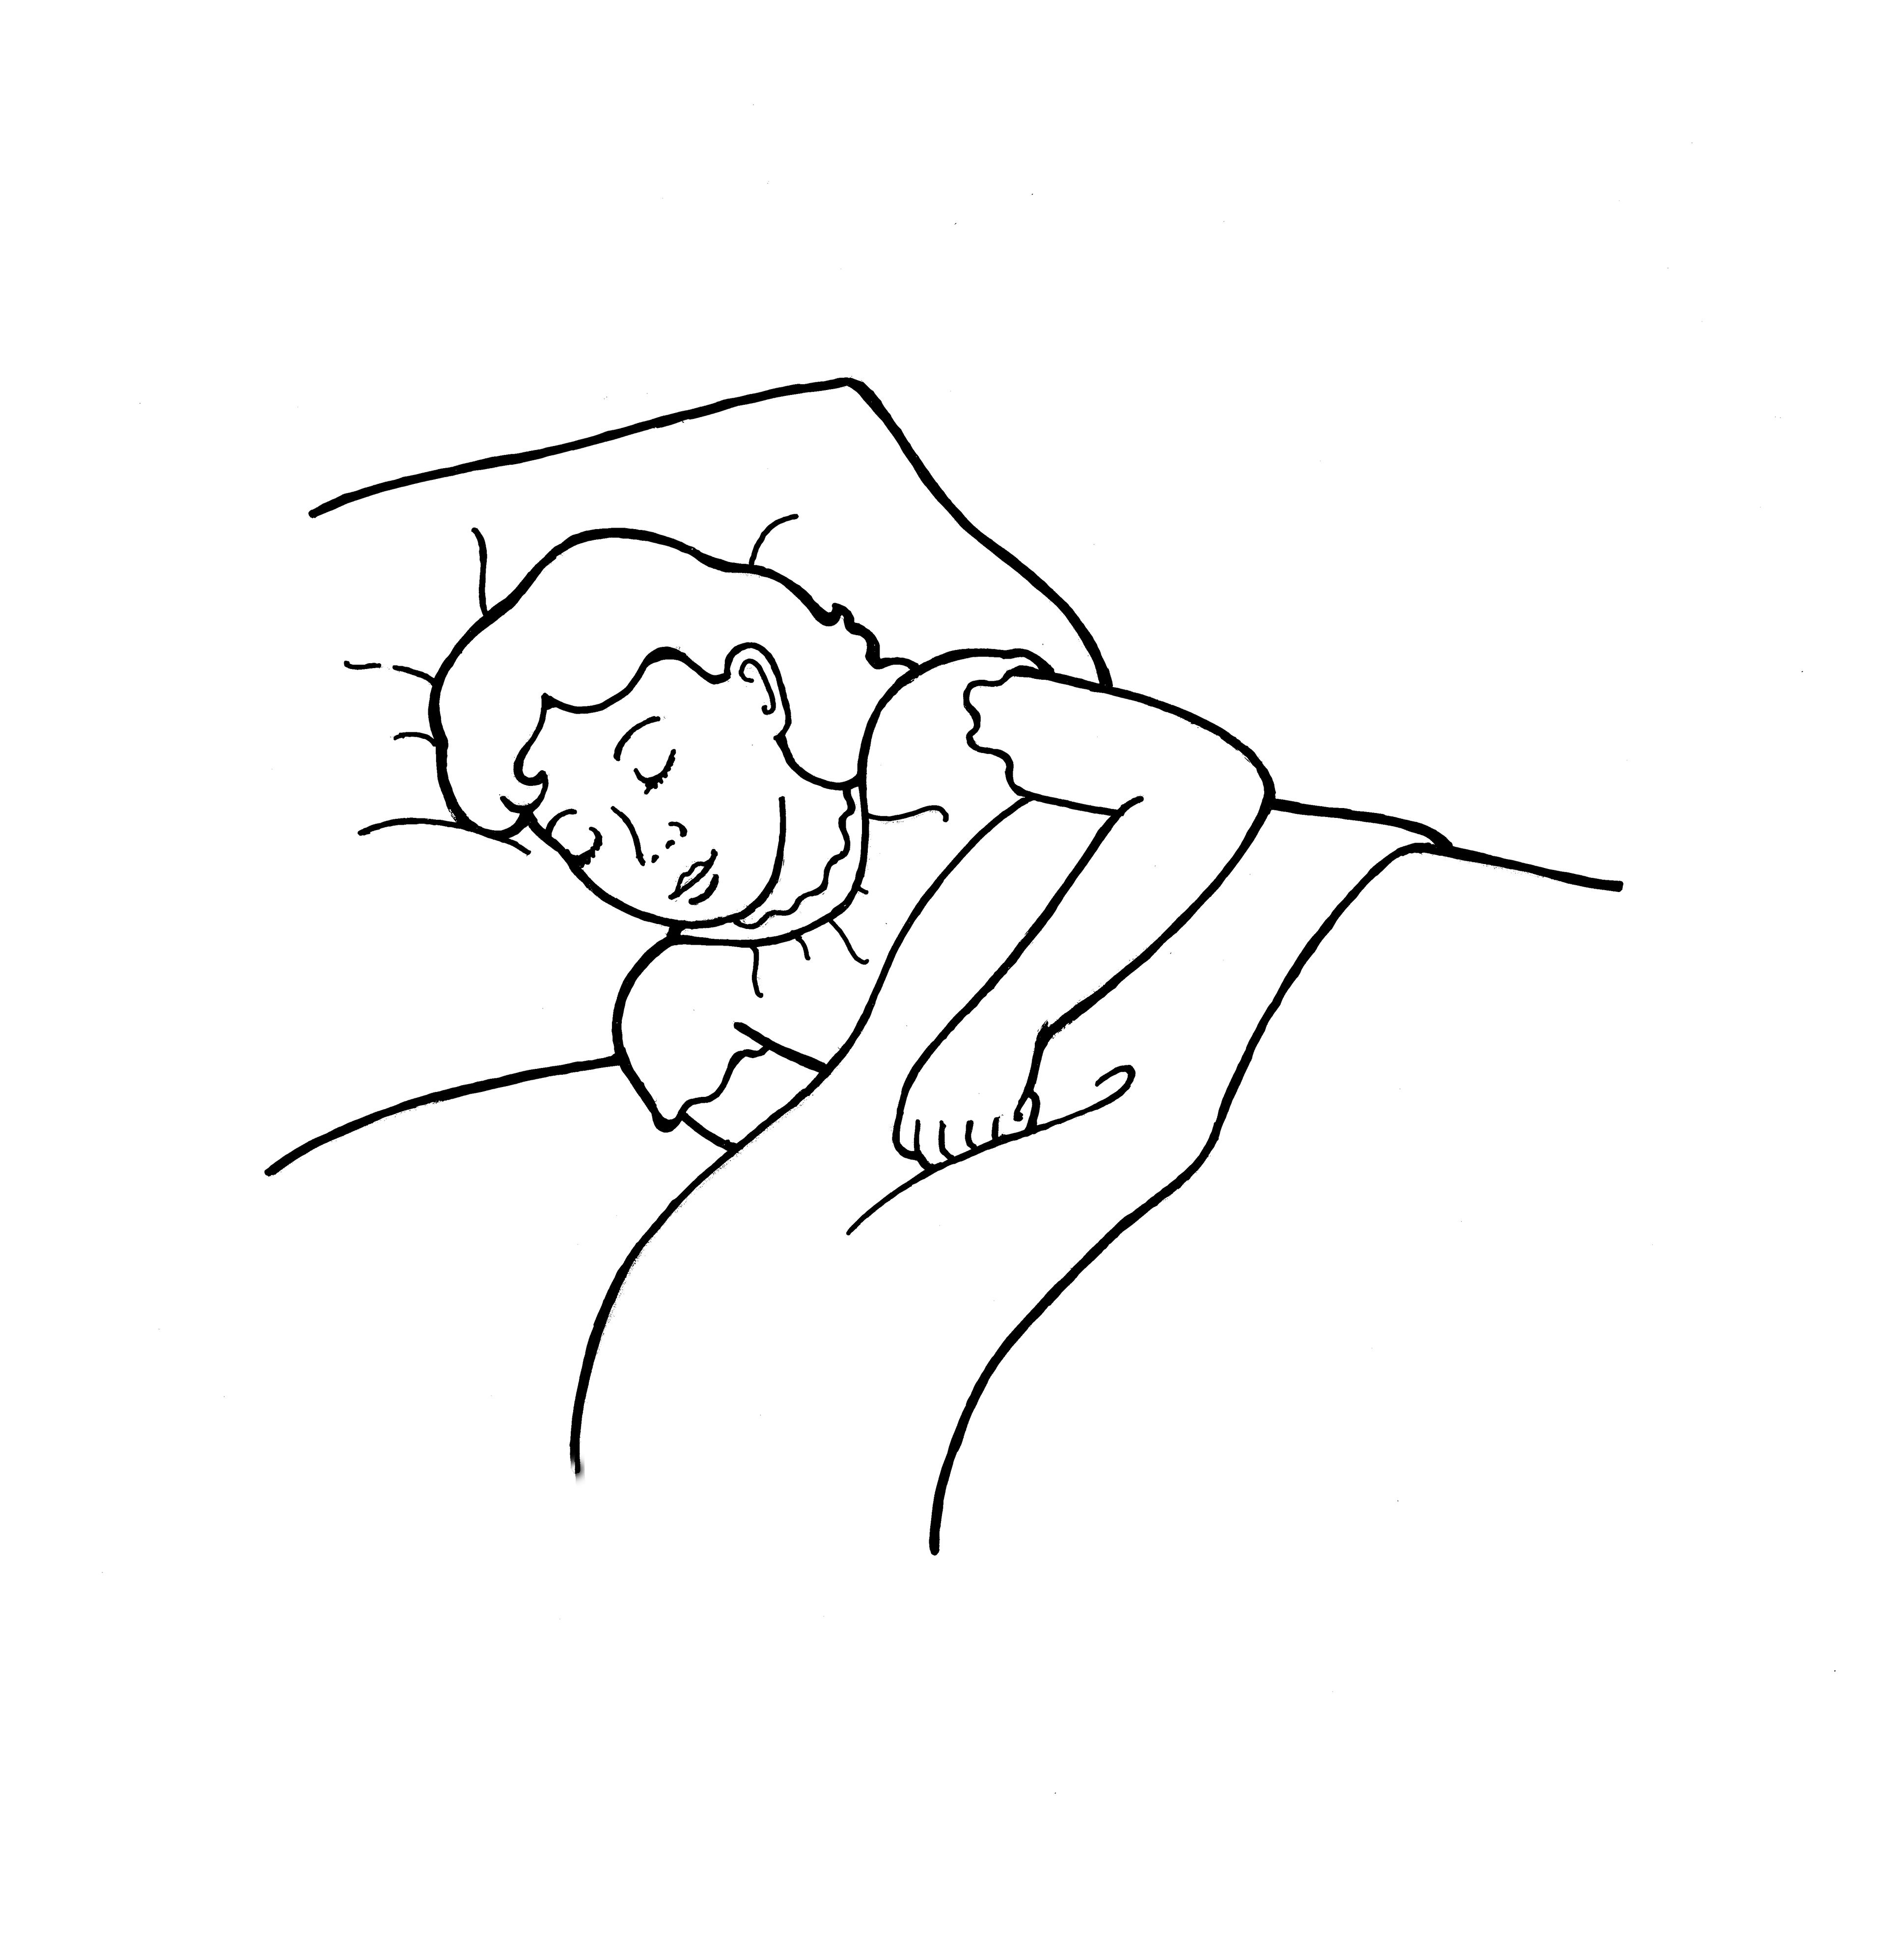 An illustration of a girl asleep in bed, from the nursery manual Behold Your Little Ones (2008), page 47.